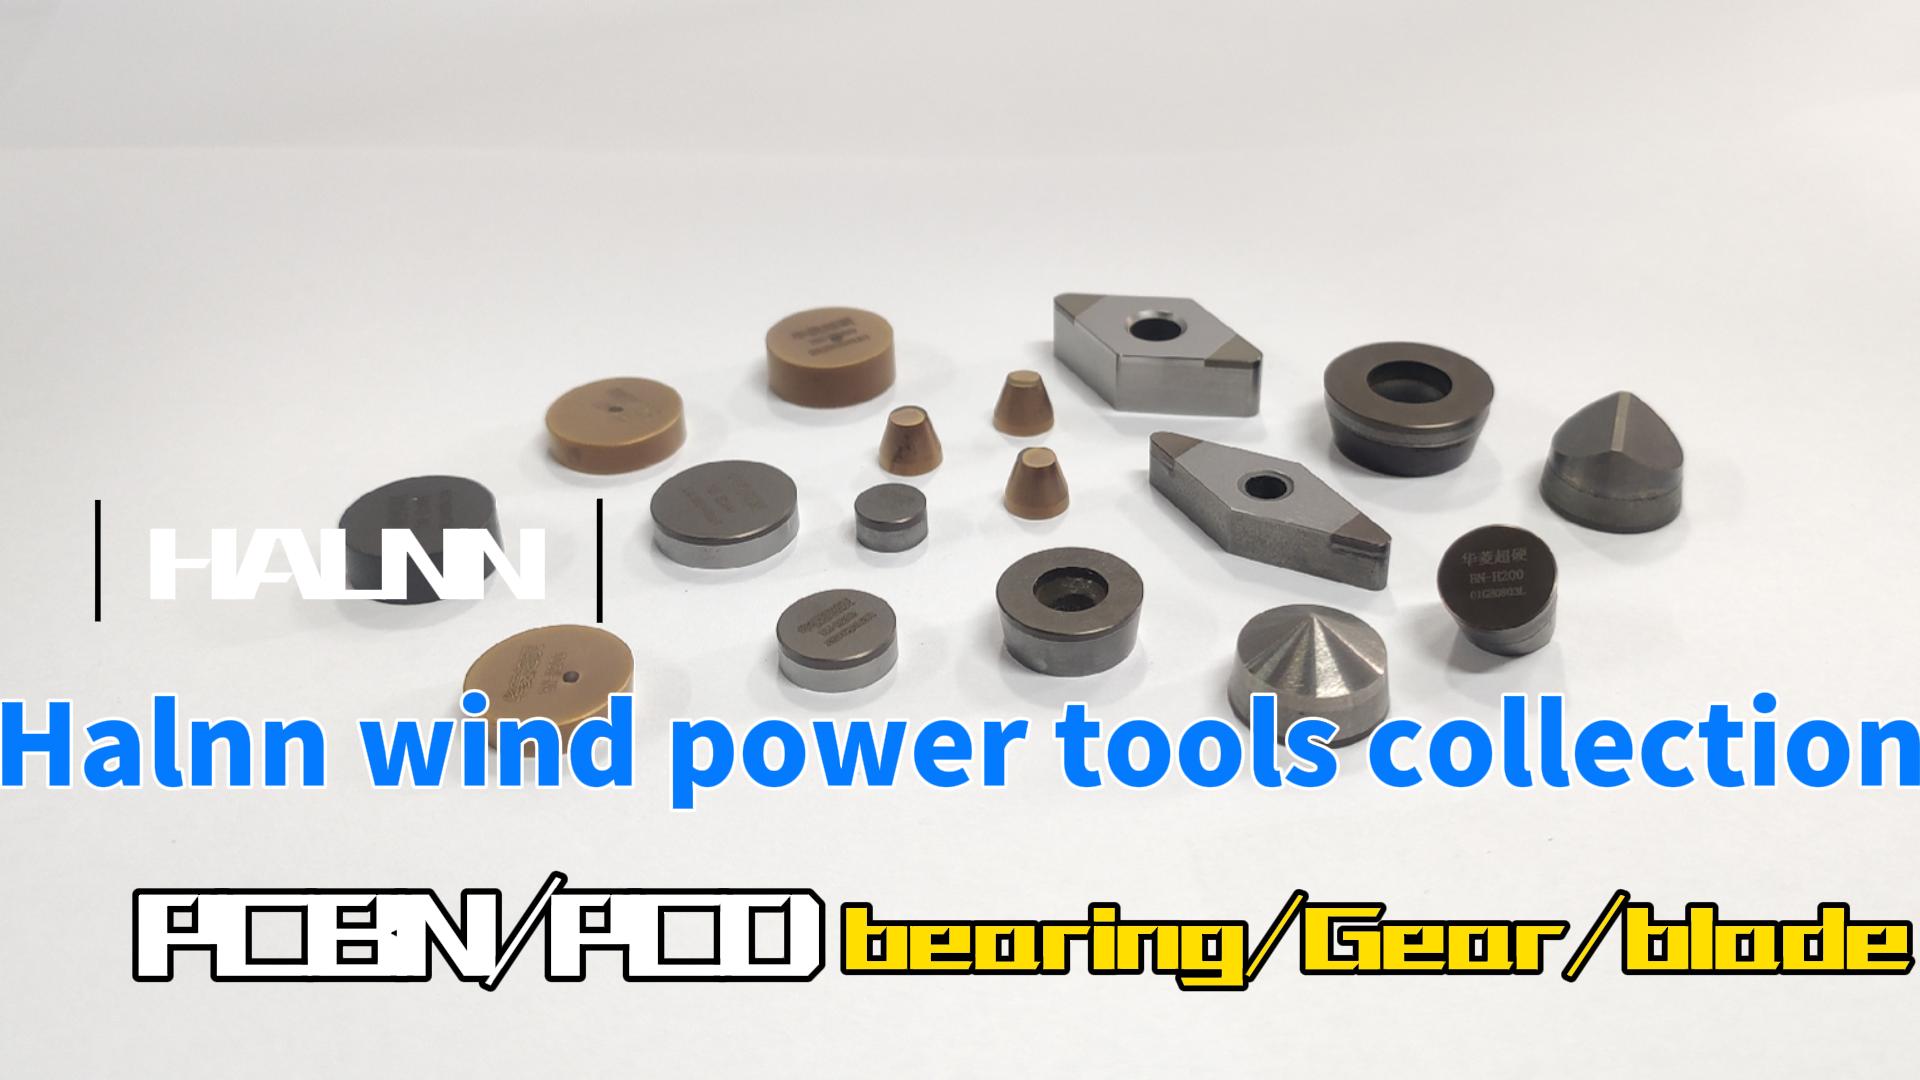 Wind turbine gear/bearing cutting with Halnn complete set of tooling solutions